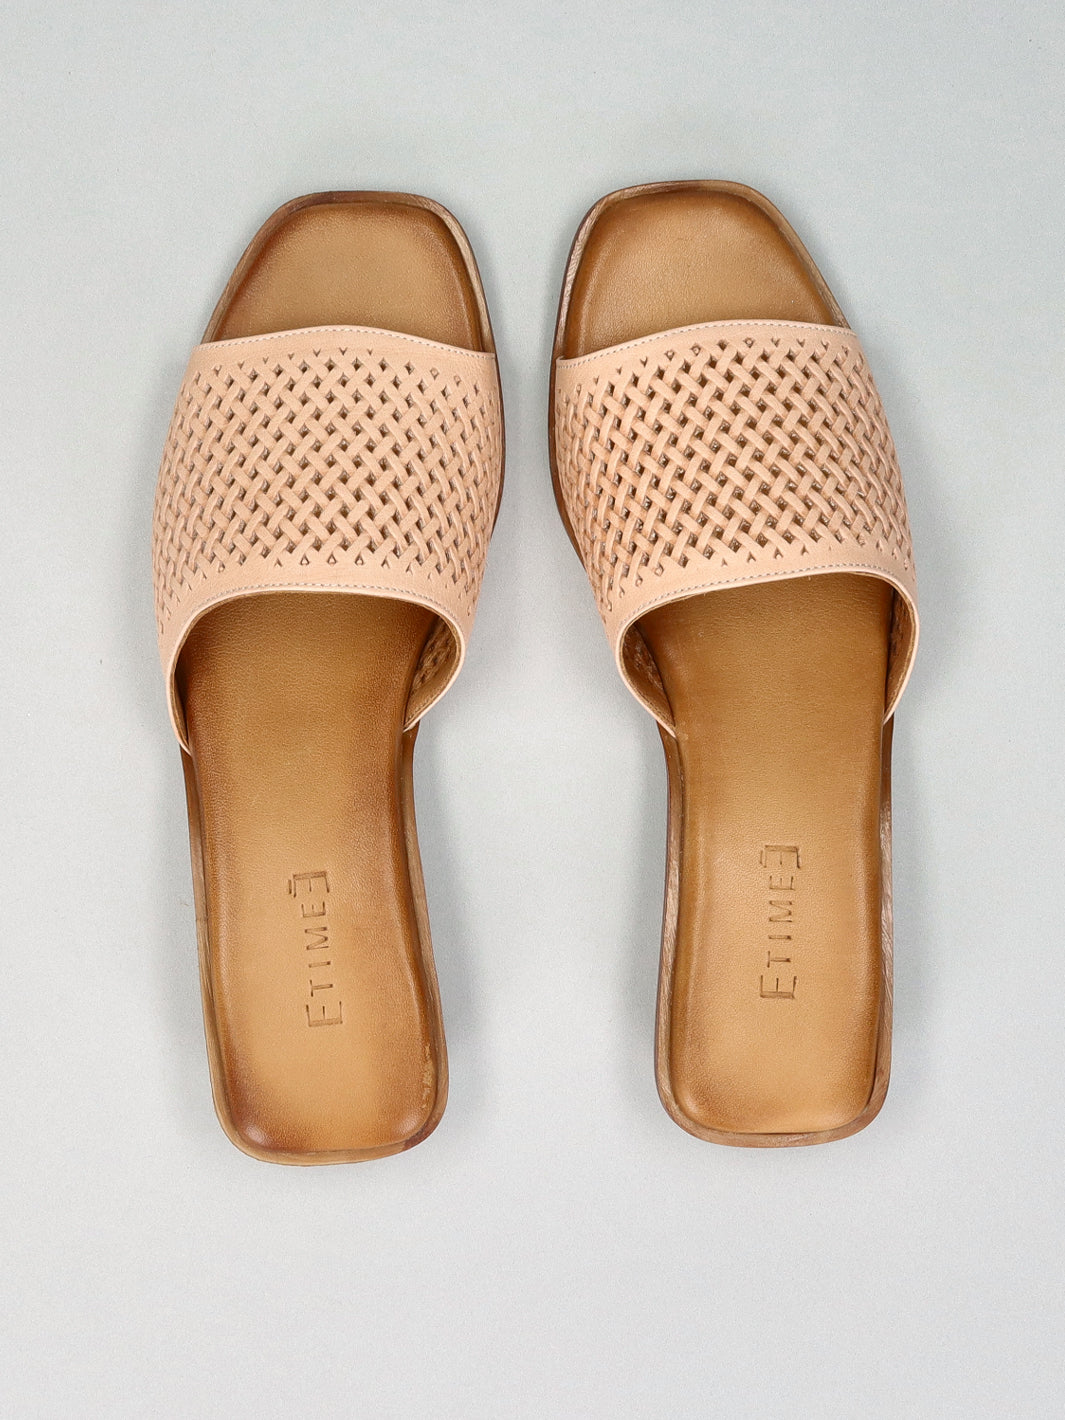 LEATHER SLIPPERS - BEIGE/BROWN